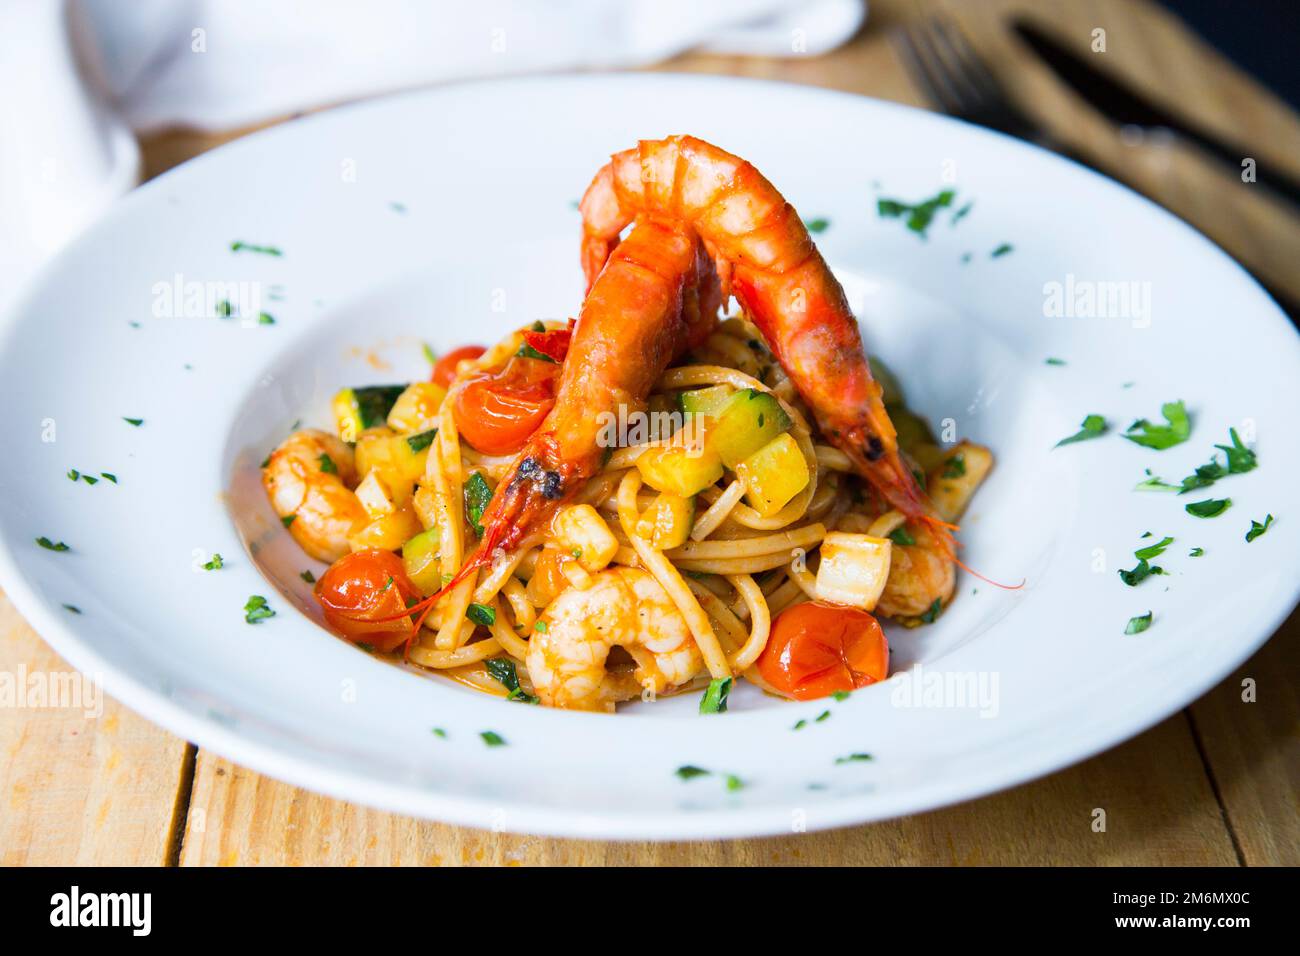 Pasta frutti di mare. Fresh pasta with seafood and vegetables. Stock Photo